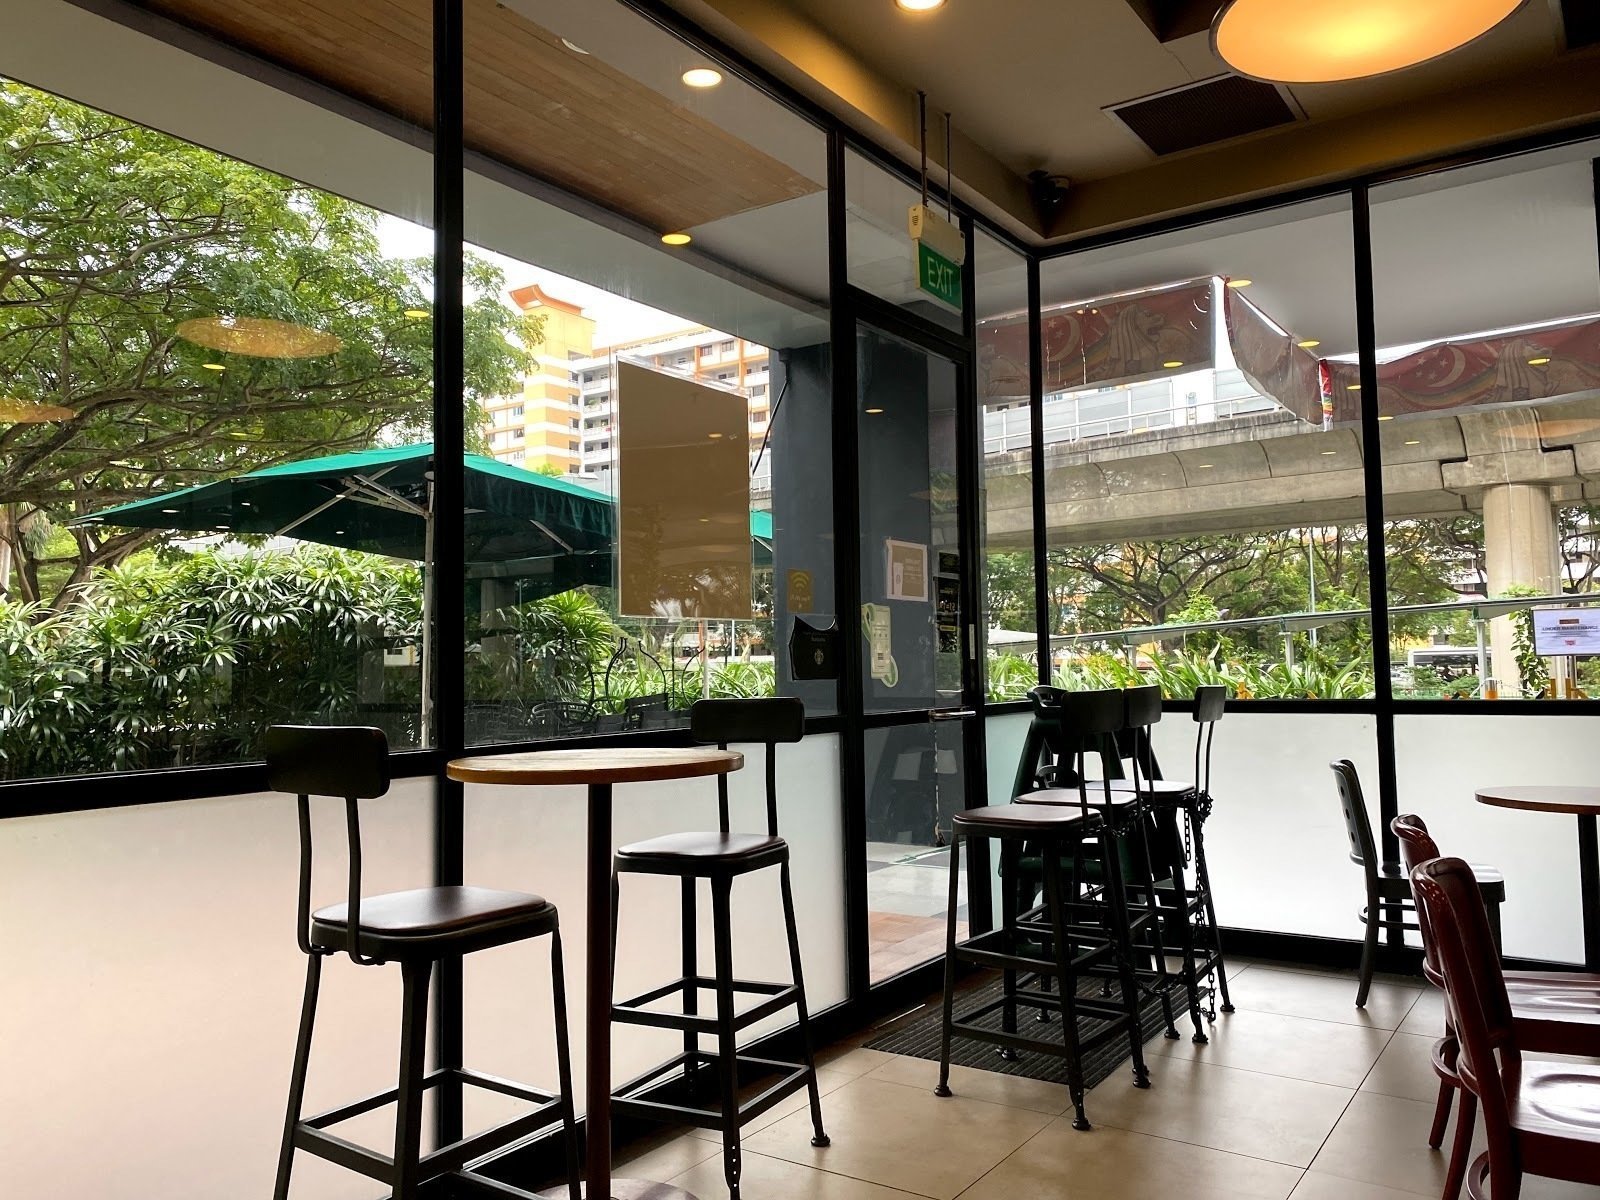 <span class="translation_missing" title="translation missing: en.meta.location_title, location_name: Starbucks @ Bedok Point, city: Singapore">Location Title</span>